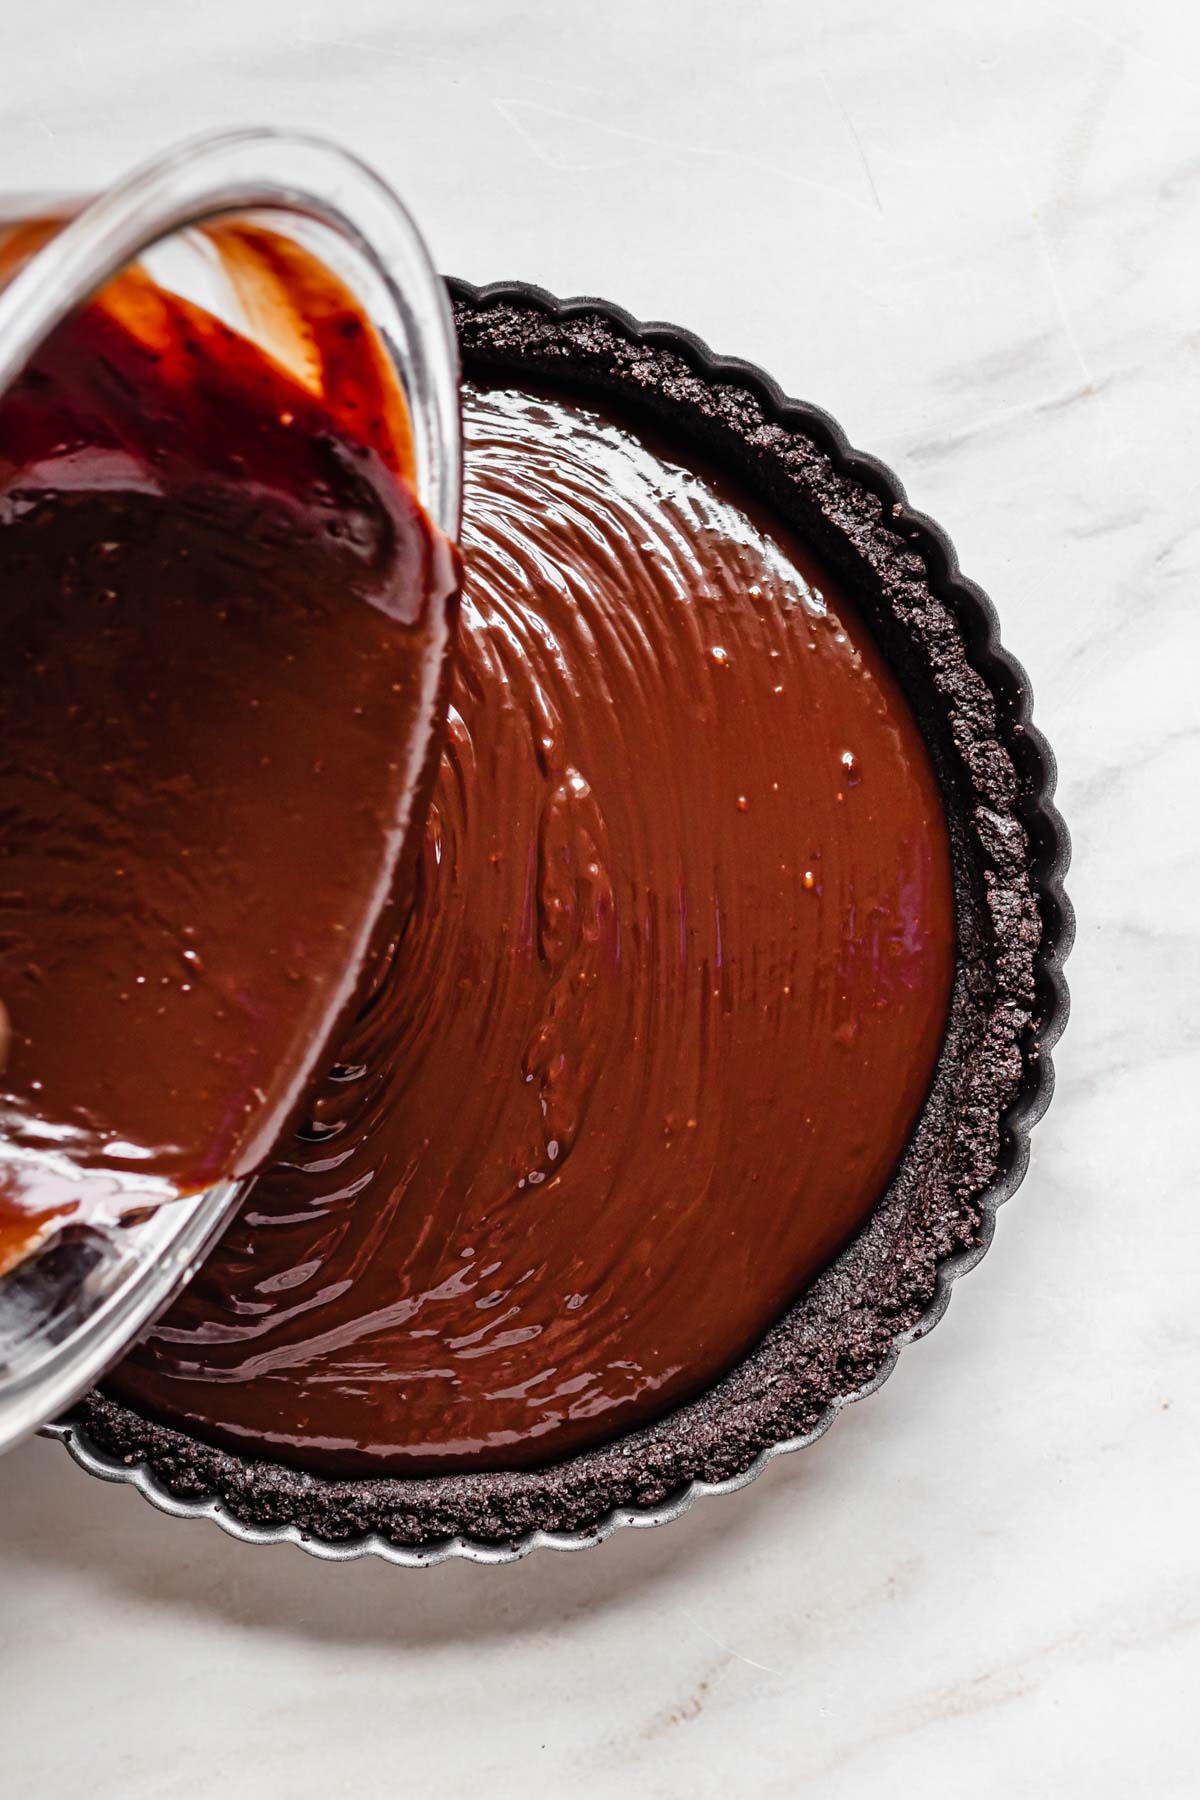 Ganache pouring into the tart shell.